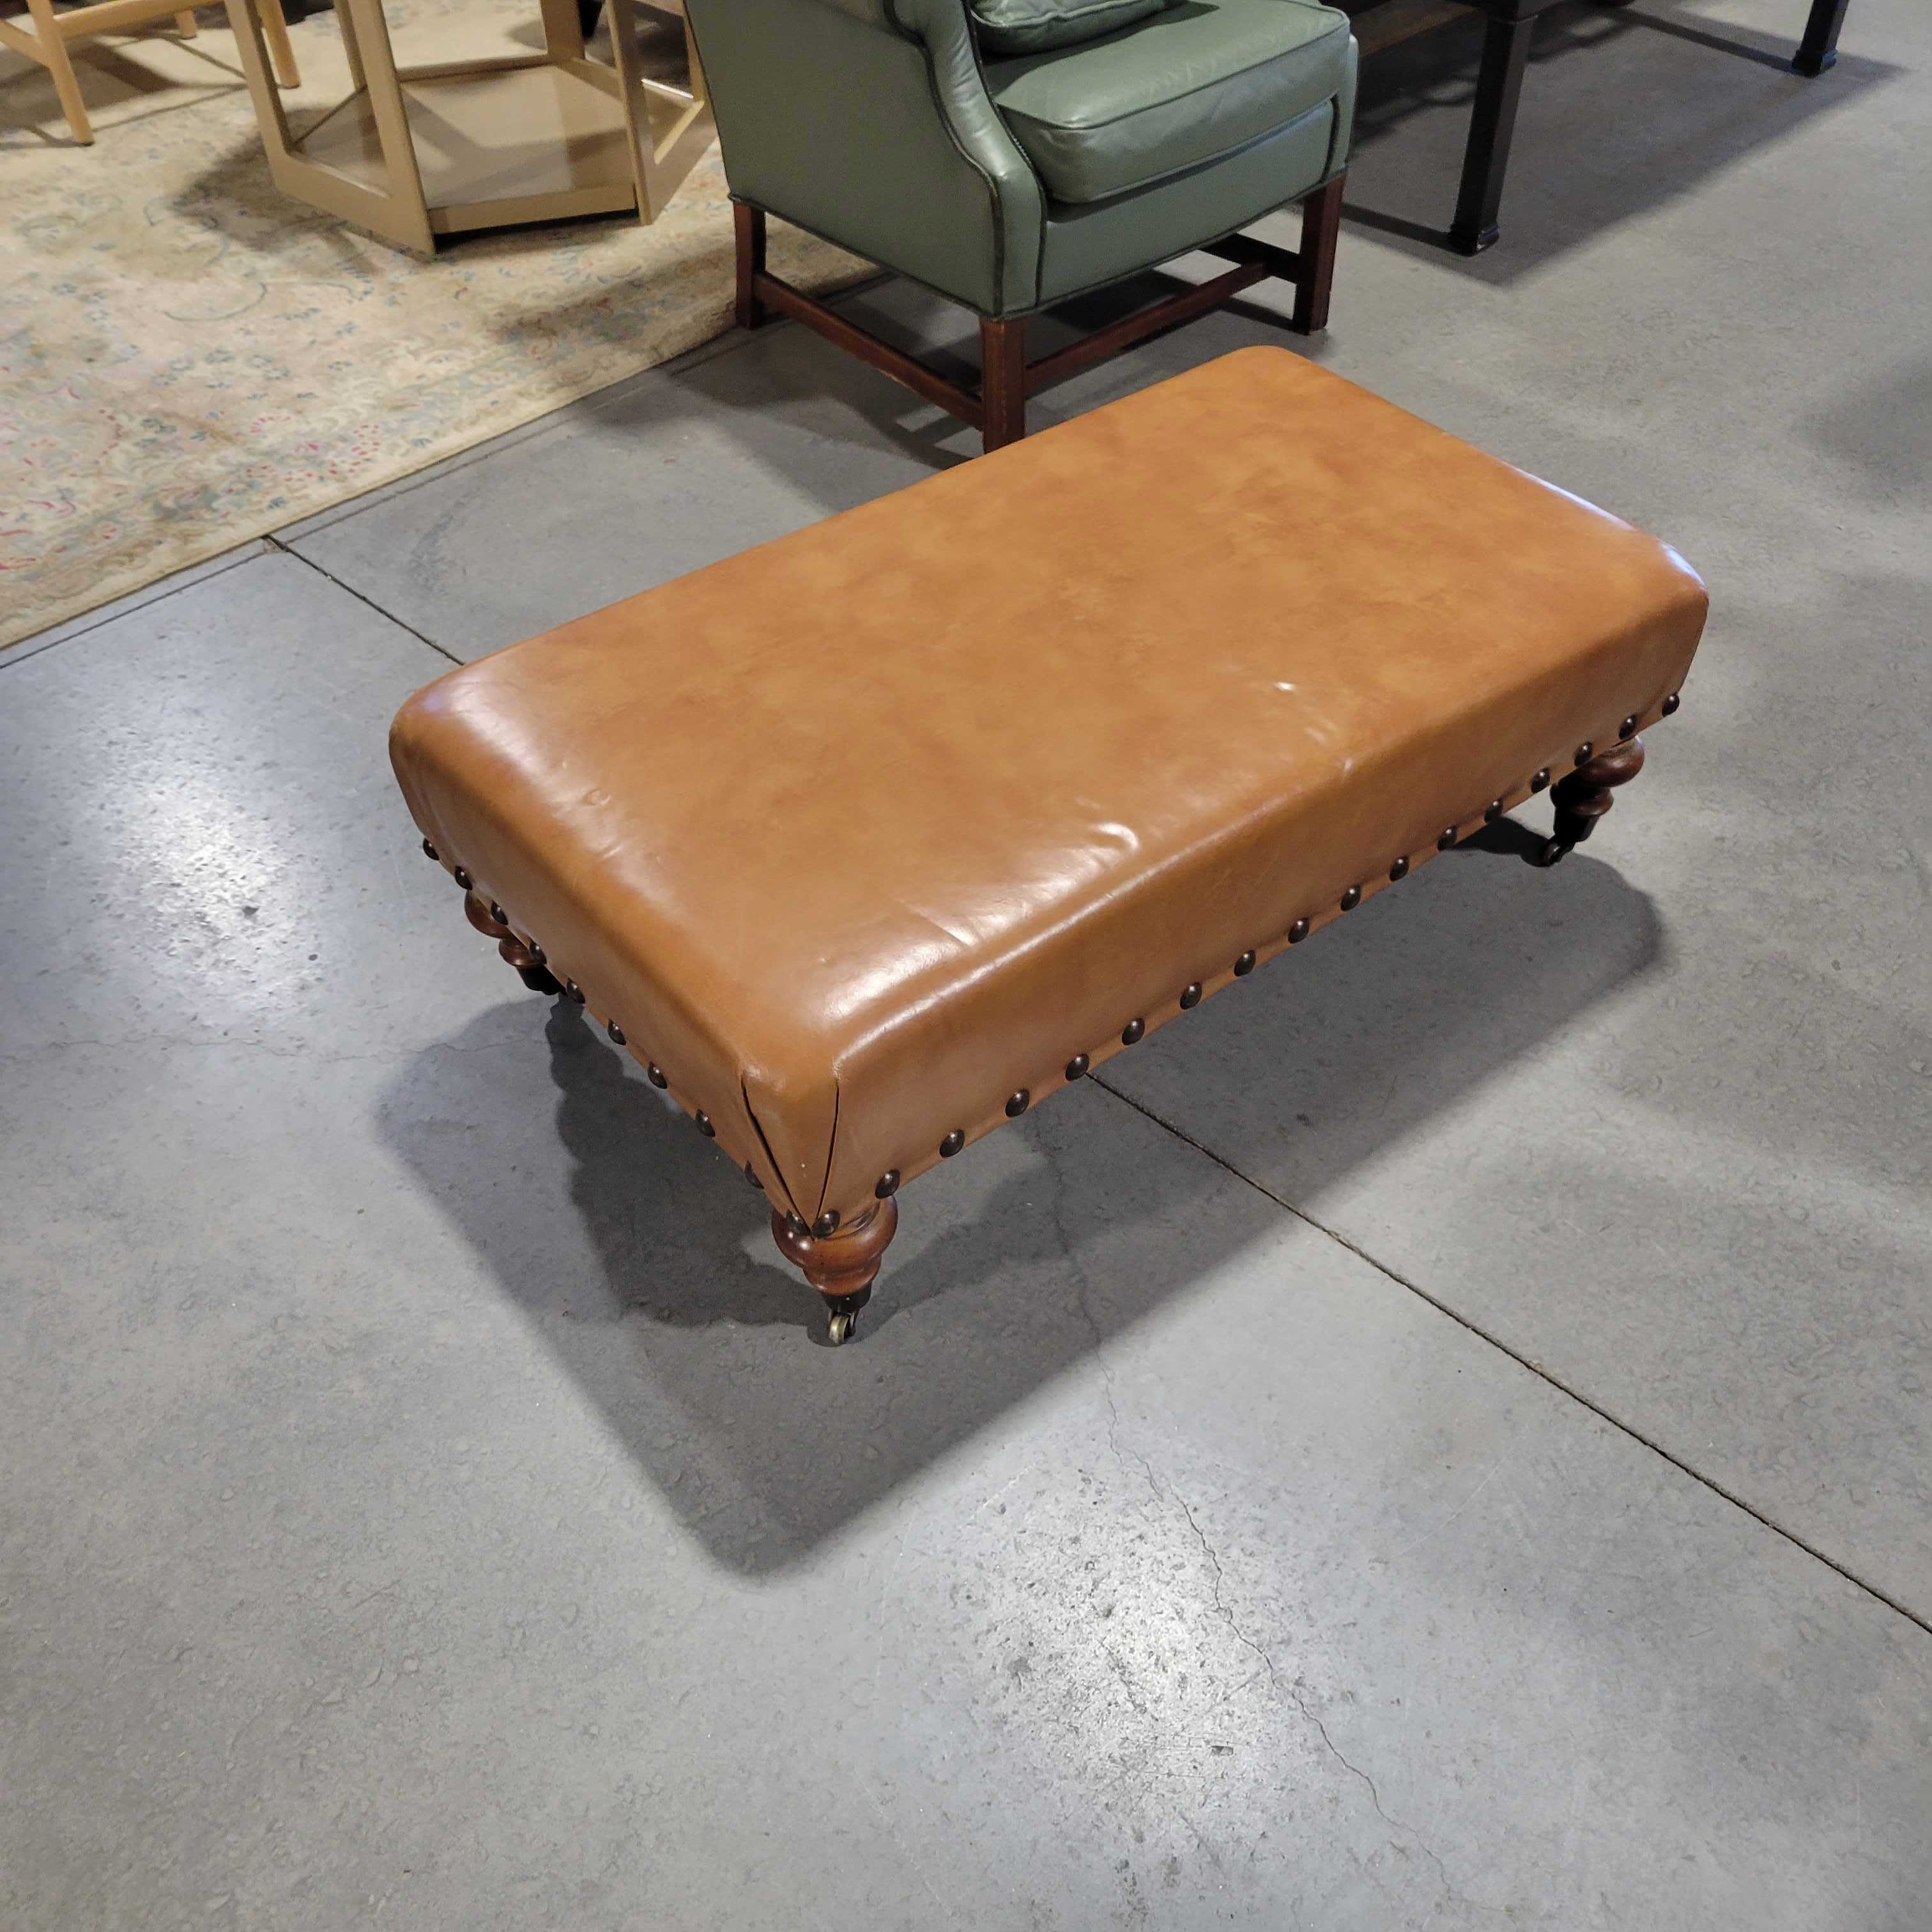 44"x 25"x 15" Brown Leather Nailhead Carved Wood on Casters Ottoman